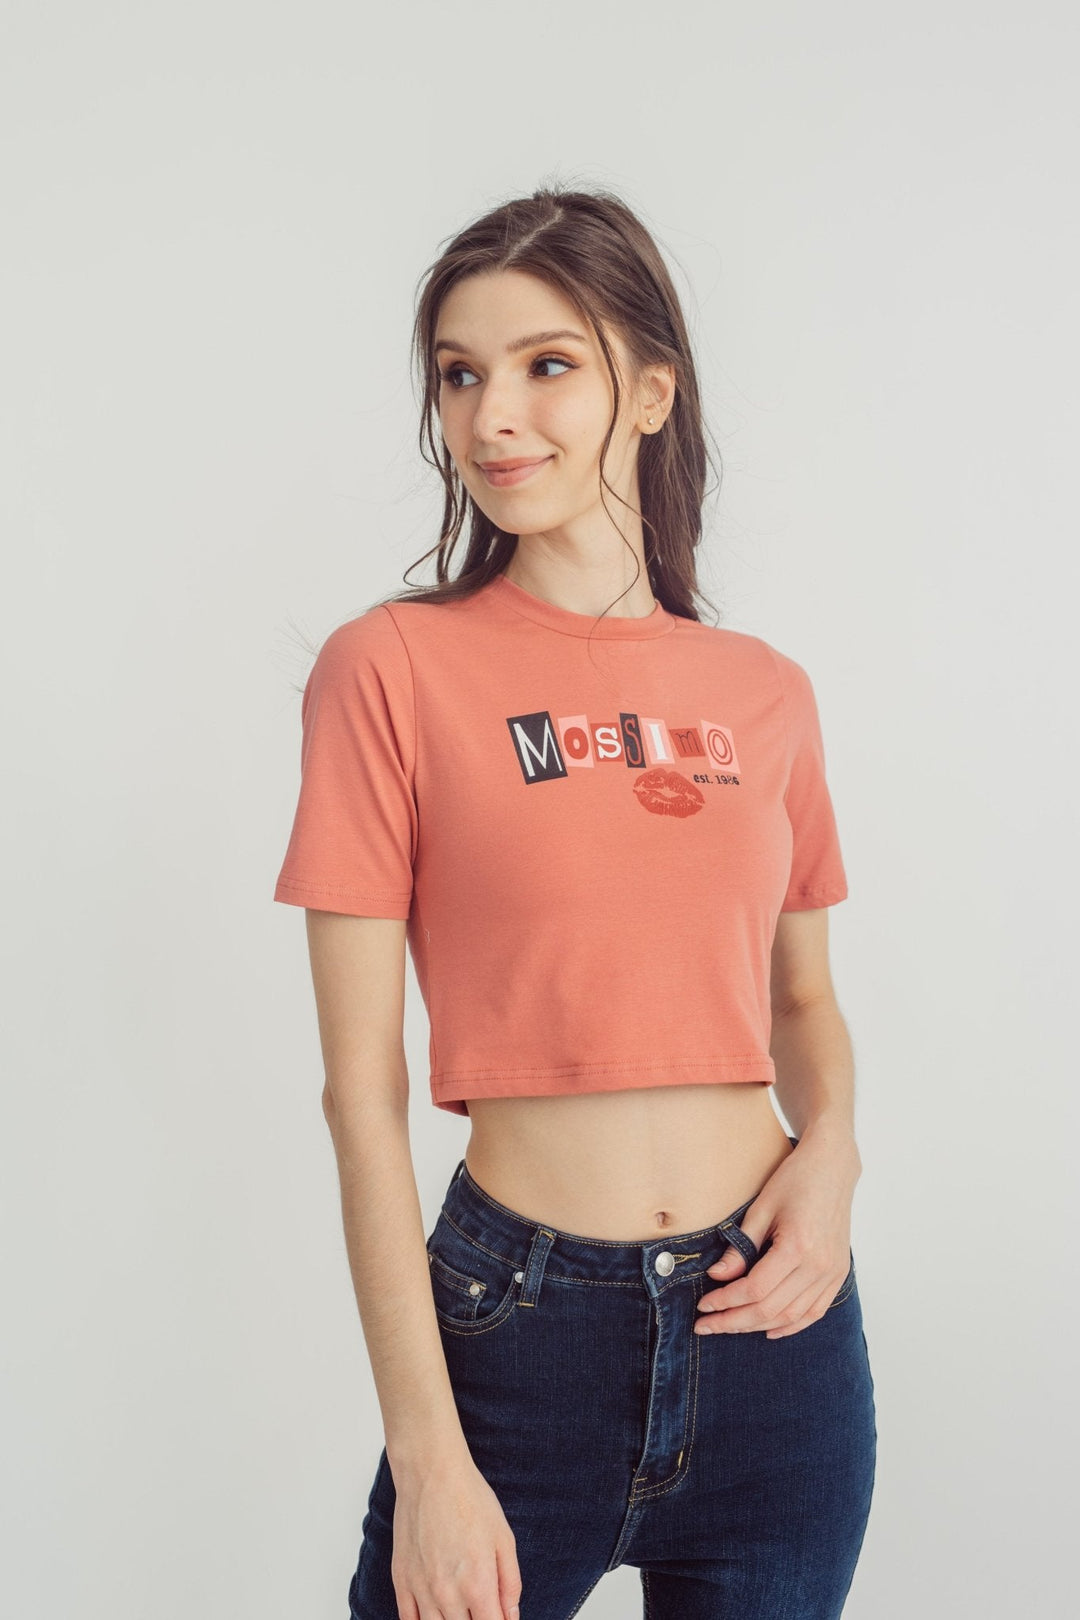 Mossimo Premium with Mossimo Big Branding Retro Cropped Fit Tee